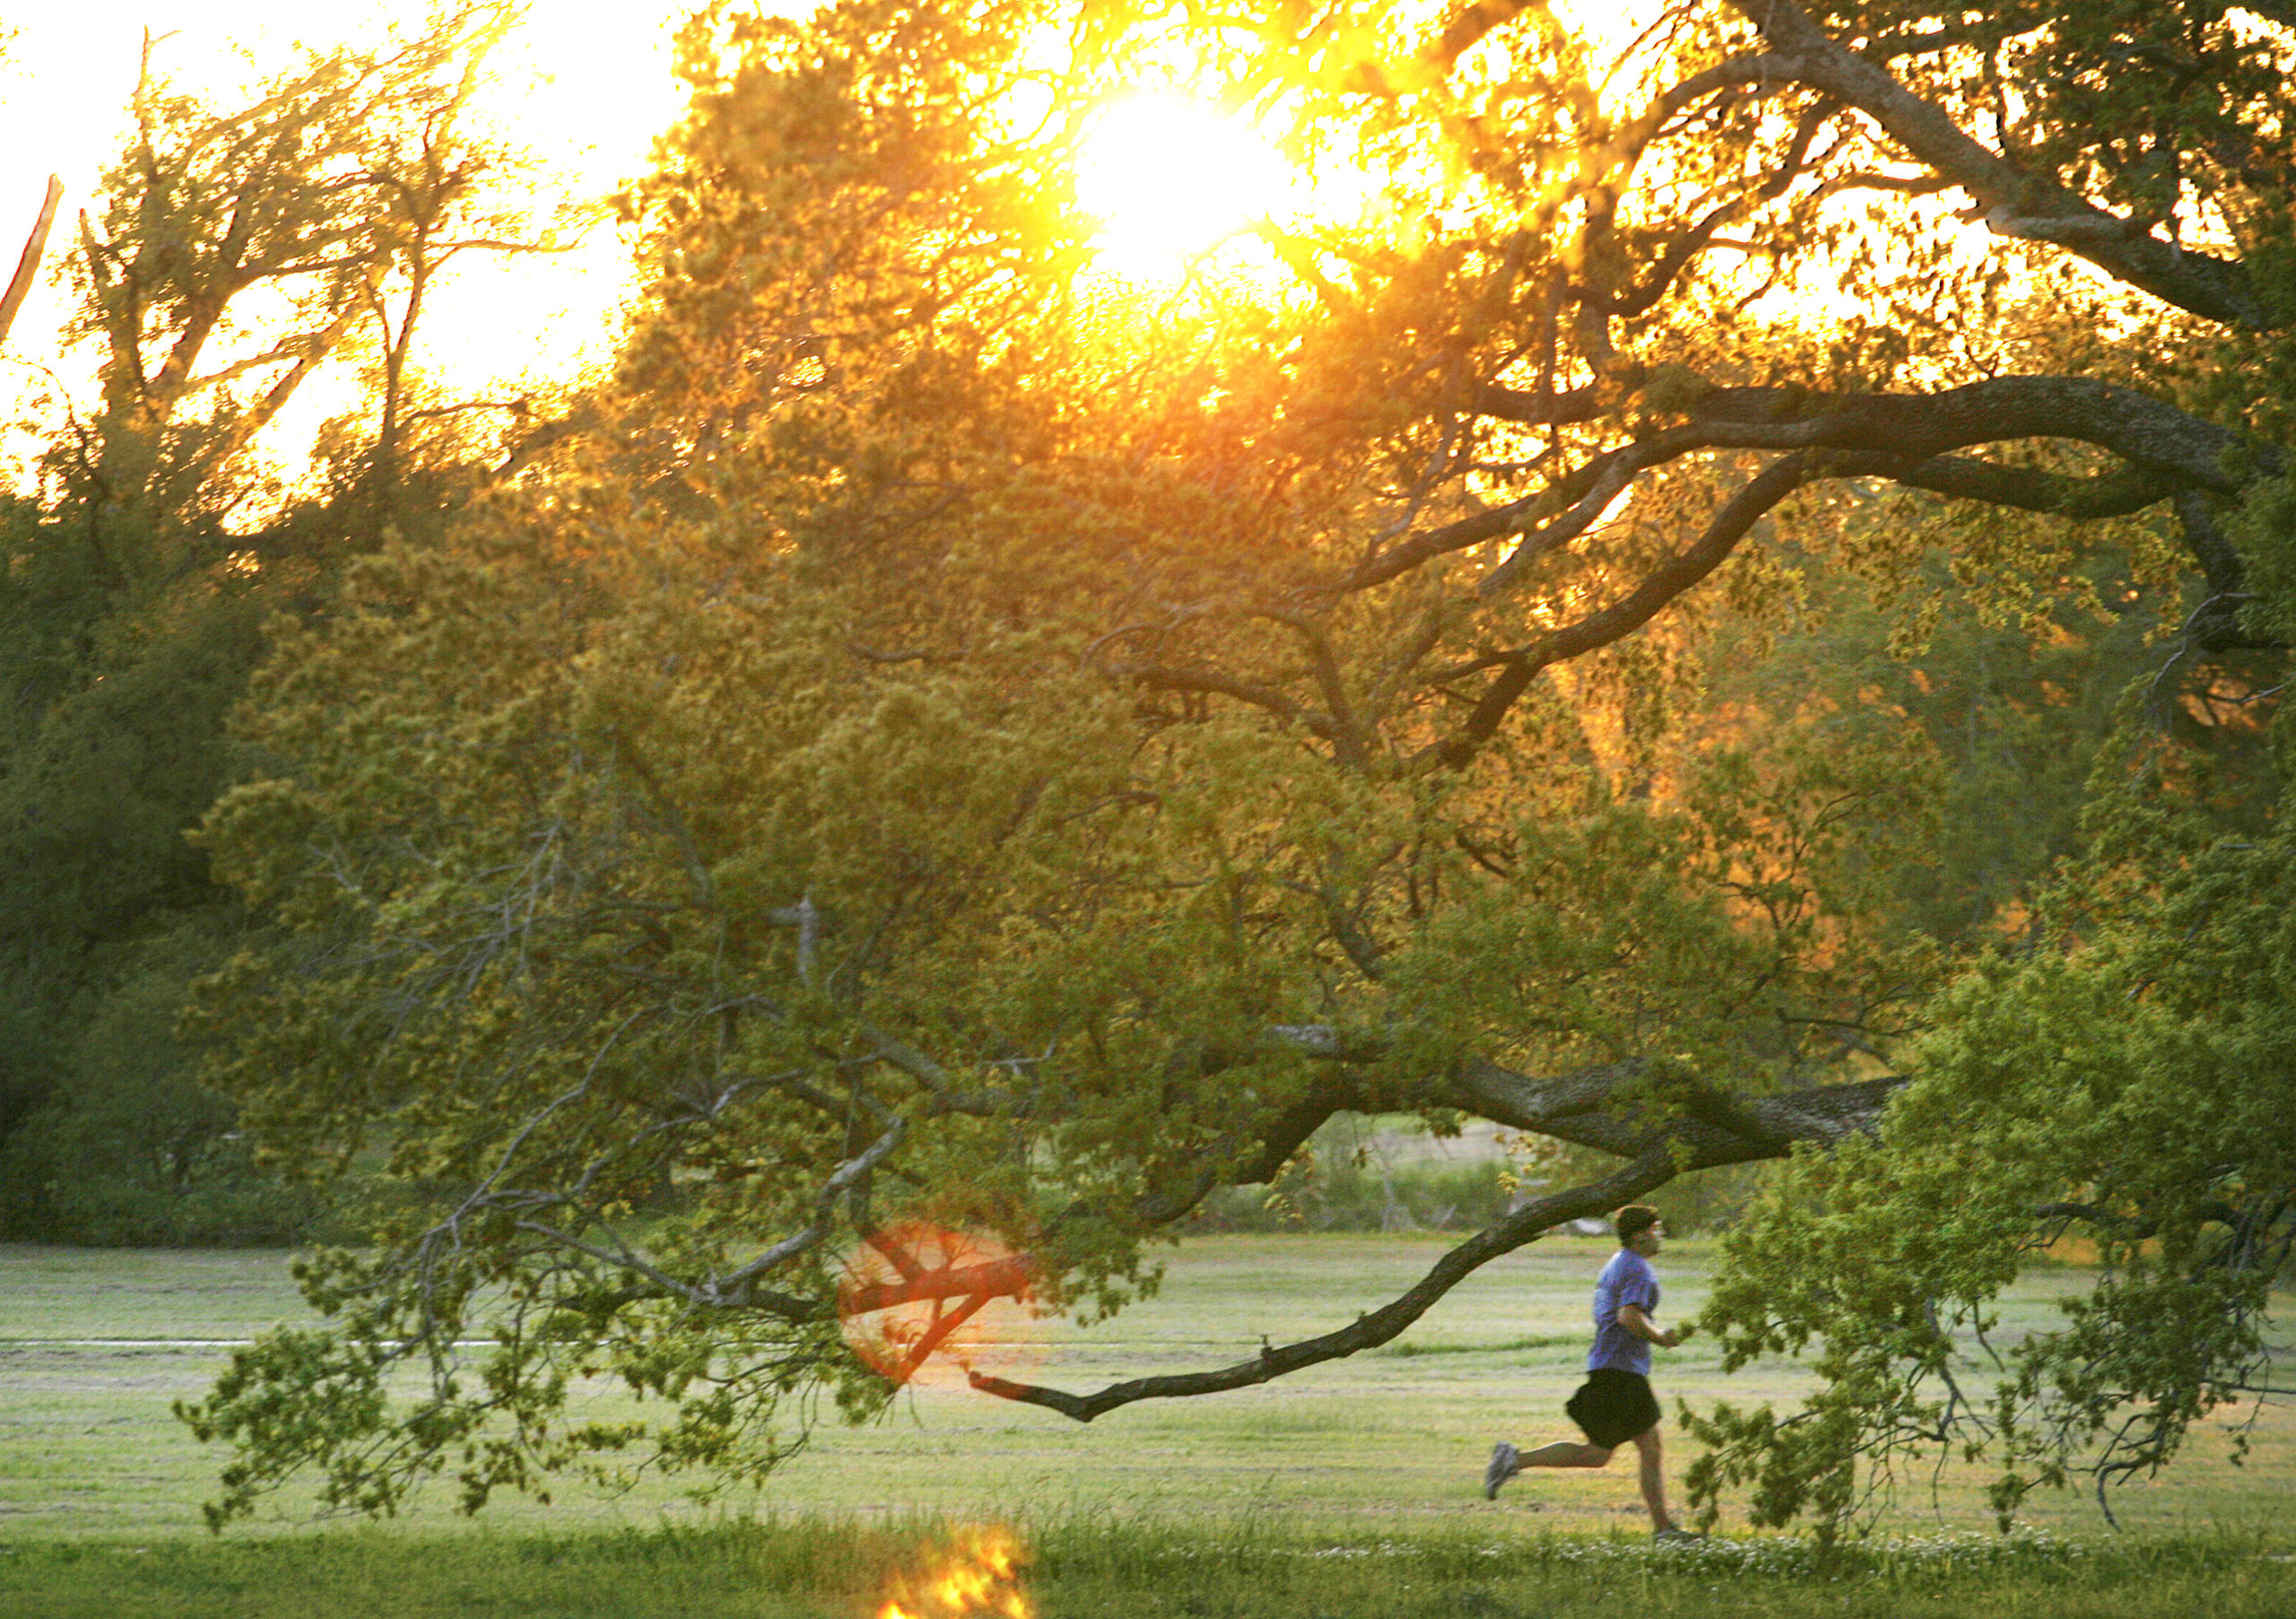 A man running in a park in New Orleans, LA